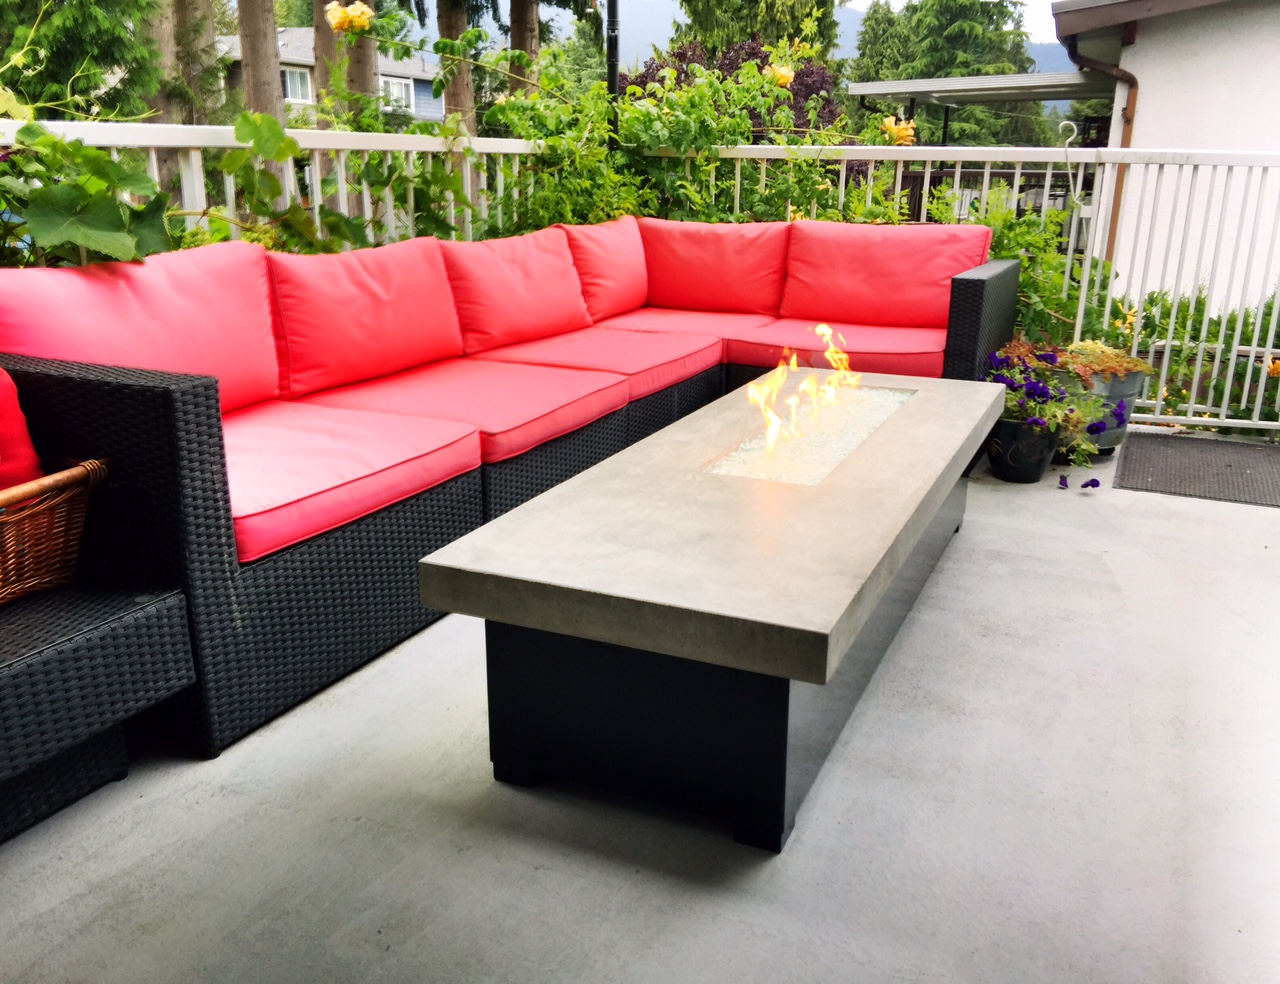 Gas Fire Pit Installation, How To Install Gas Fire Pit On Deck